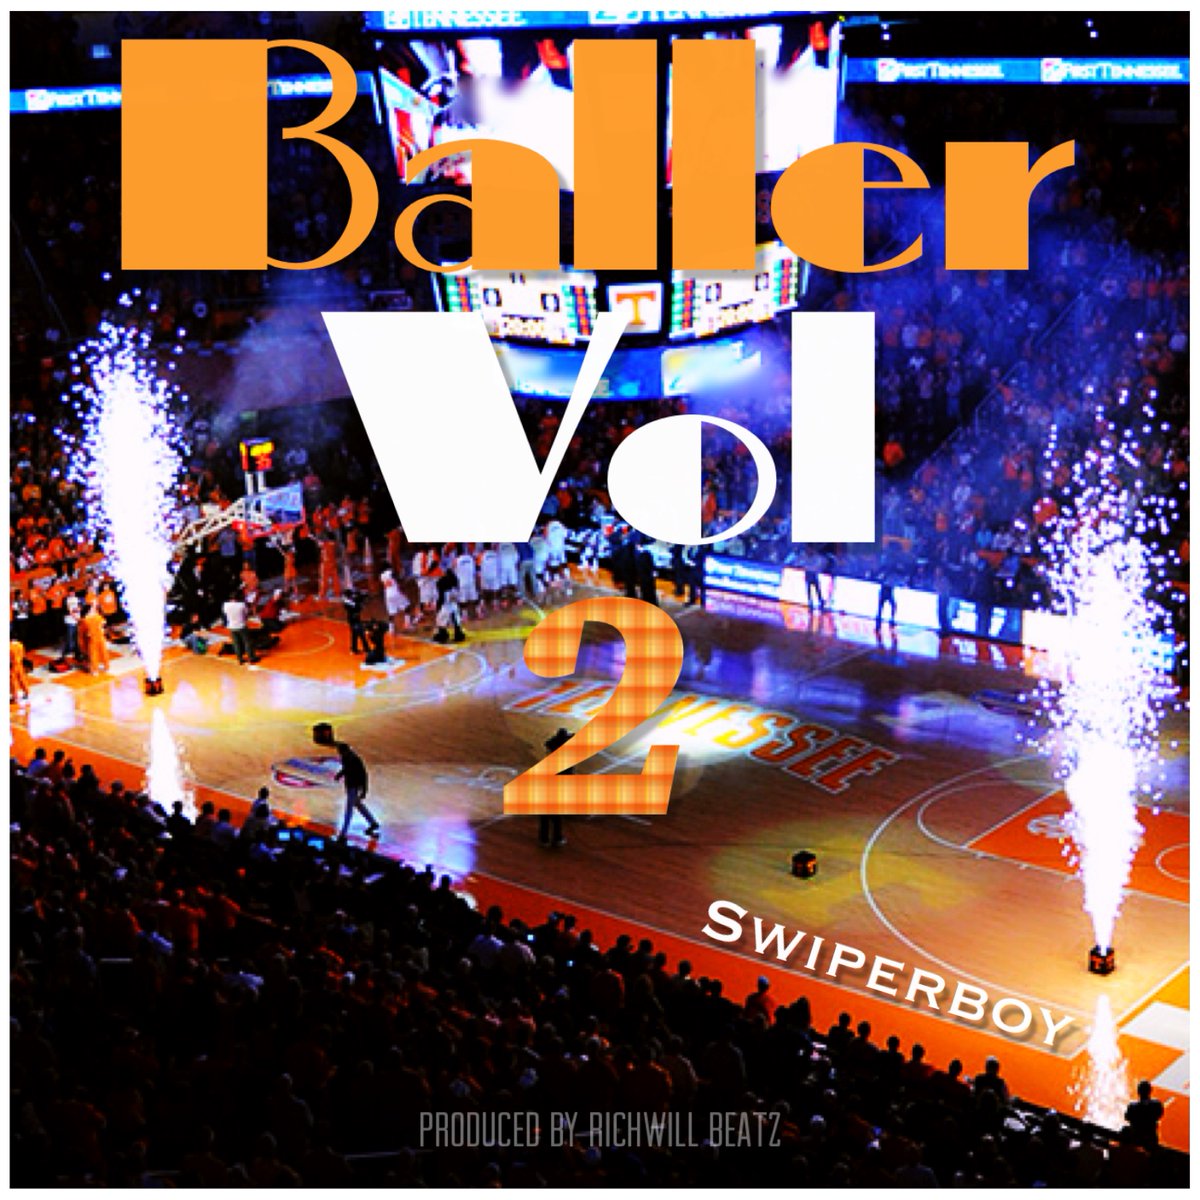 Another #Vols WIN, STILL # 1 = a NEW song! BALLER VOL 2 out NOW!! Available worldwide on all commercial music platforms! Links: YouTube: youtube.com/watch?v=nzLPsg… Apple Music: itunes.apple.com/album/id/14518… Spotify: open.spotify.com/album/56HEzQ9i… RT/FAV! #Vols #VFL #GBO #NewMusic